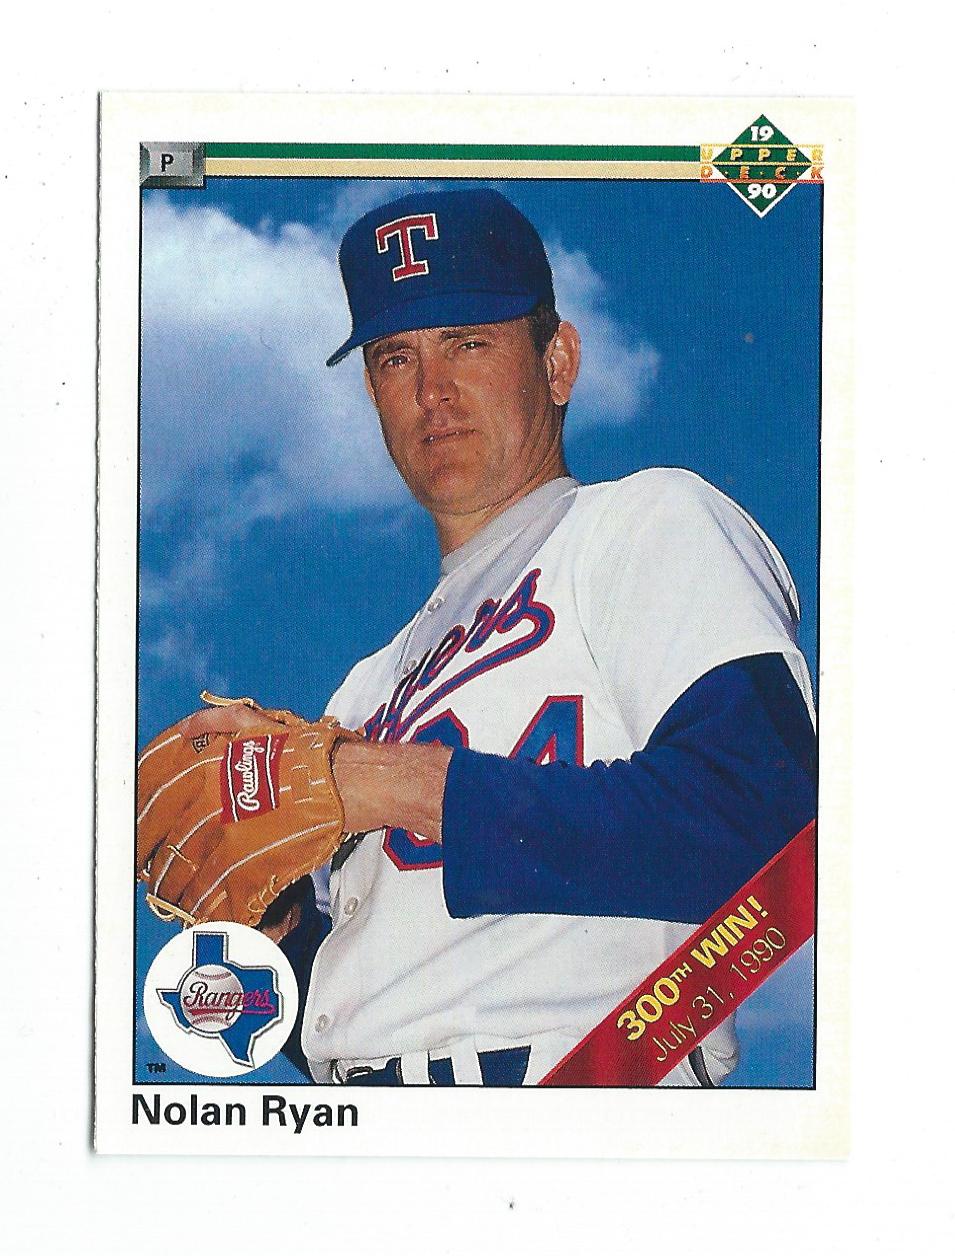 1990 Upper Deck #734B Nolan Ryan/6th No-Hitter/stripe added on card/front for 300th win